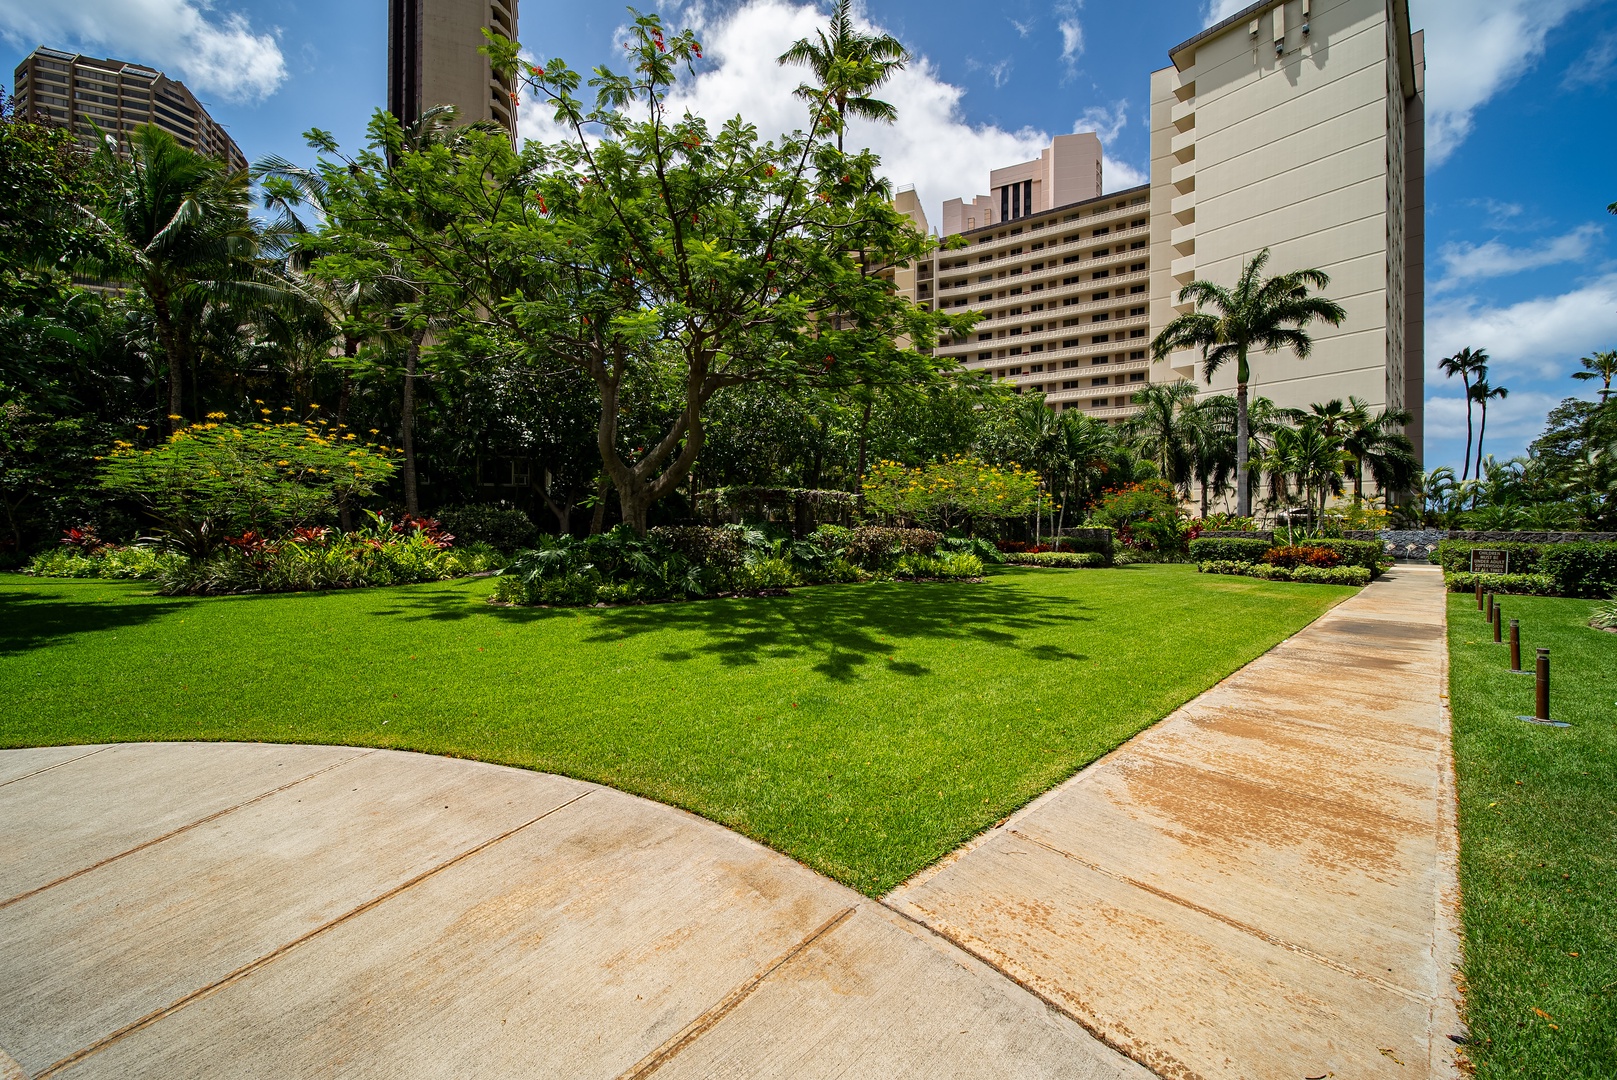 Honolulu Vacation Rentals, Watermark Waikiki Unit 901 - Explore the community area with paths and landscaping.